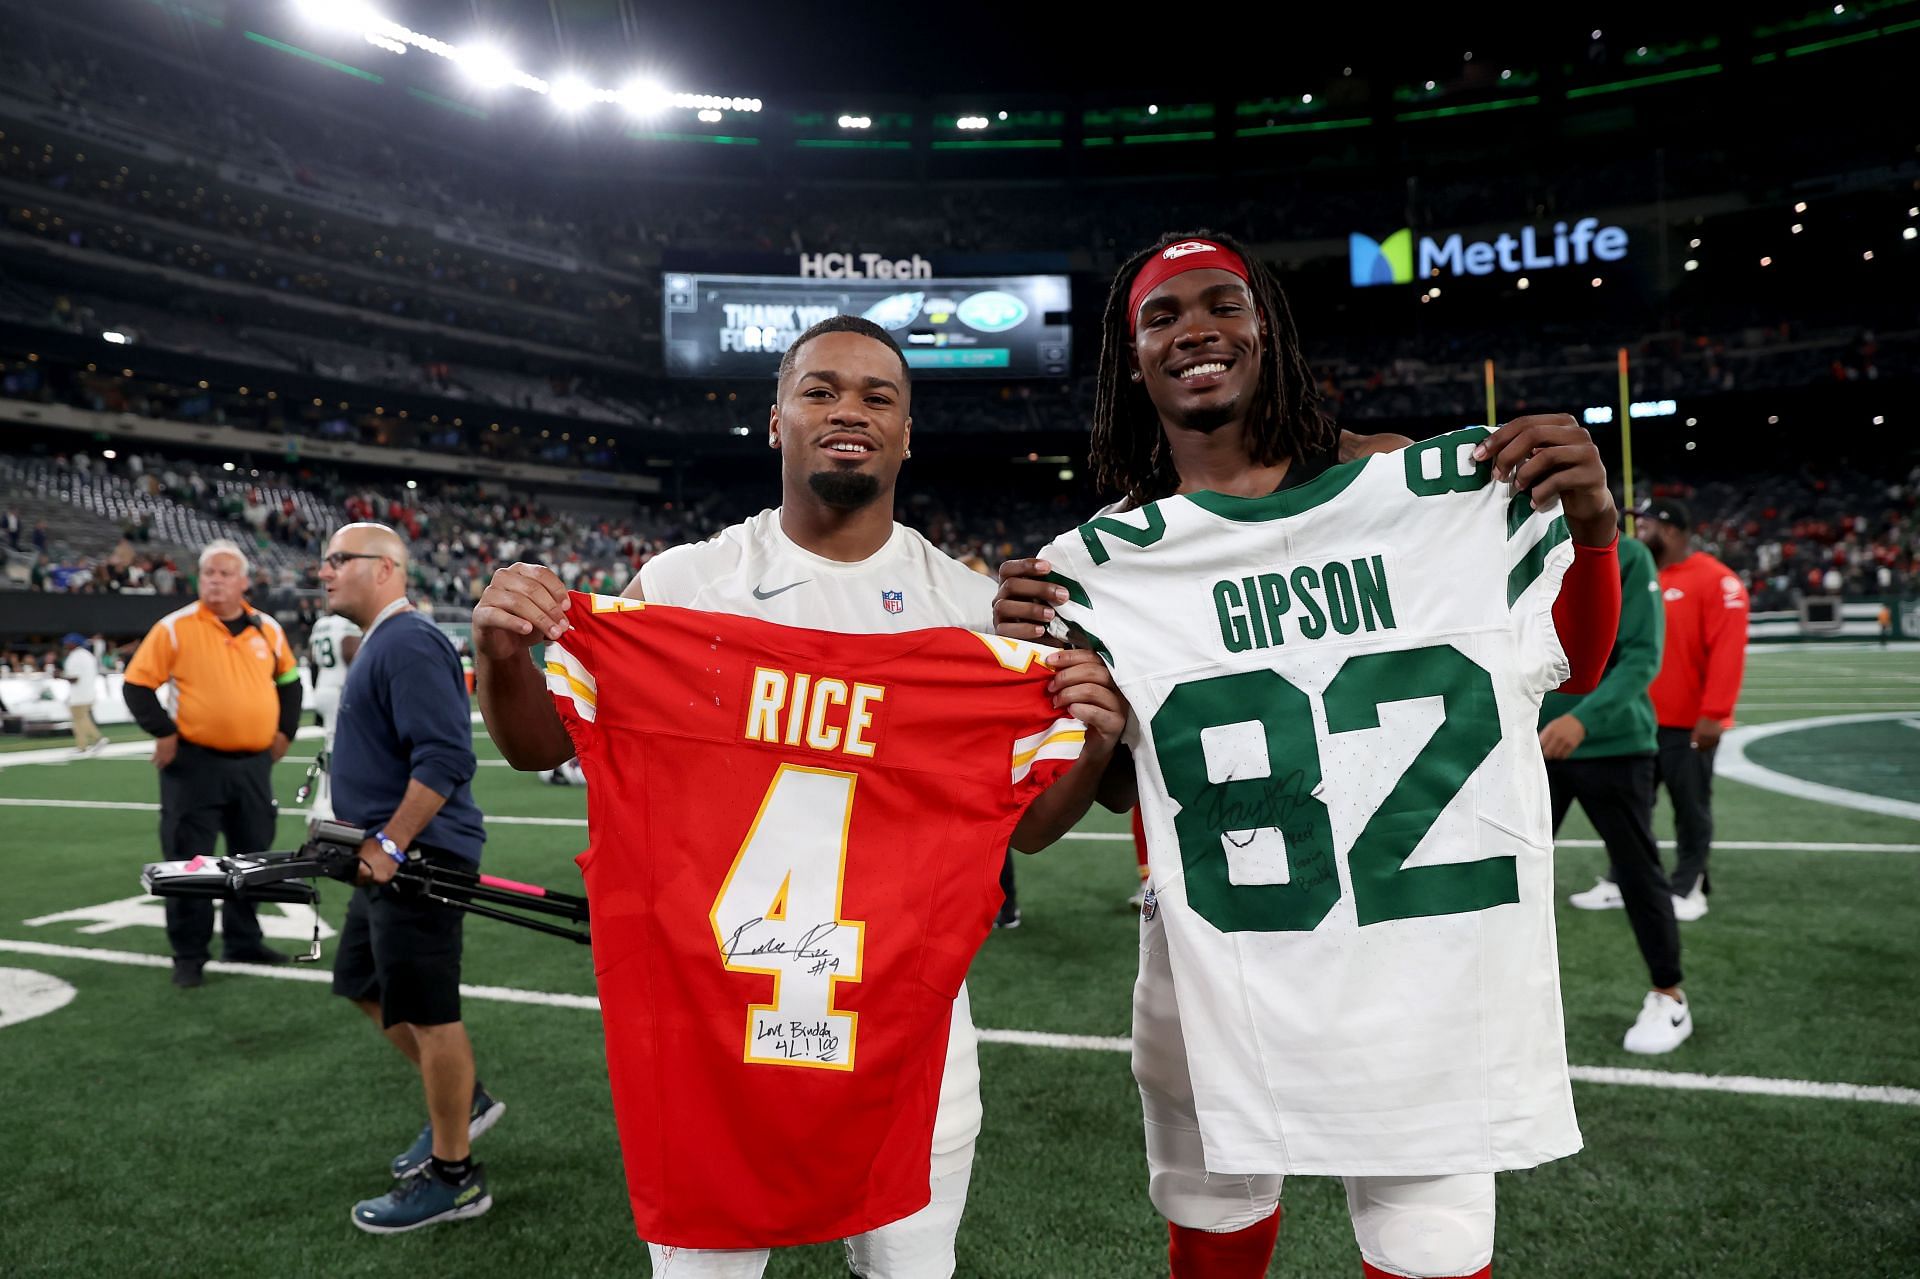 Rice (right) exchanges jerseys at Kansas City Chiefs vs. New York Jets